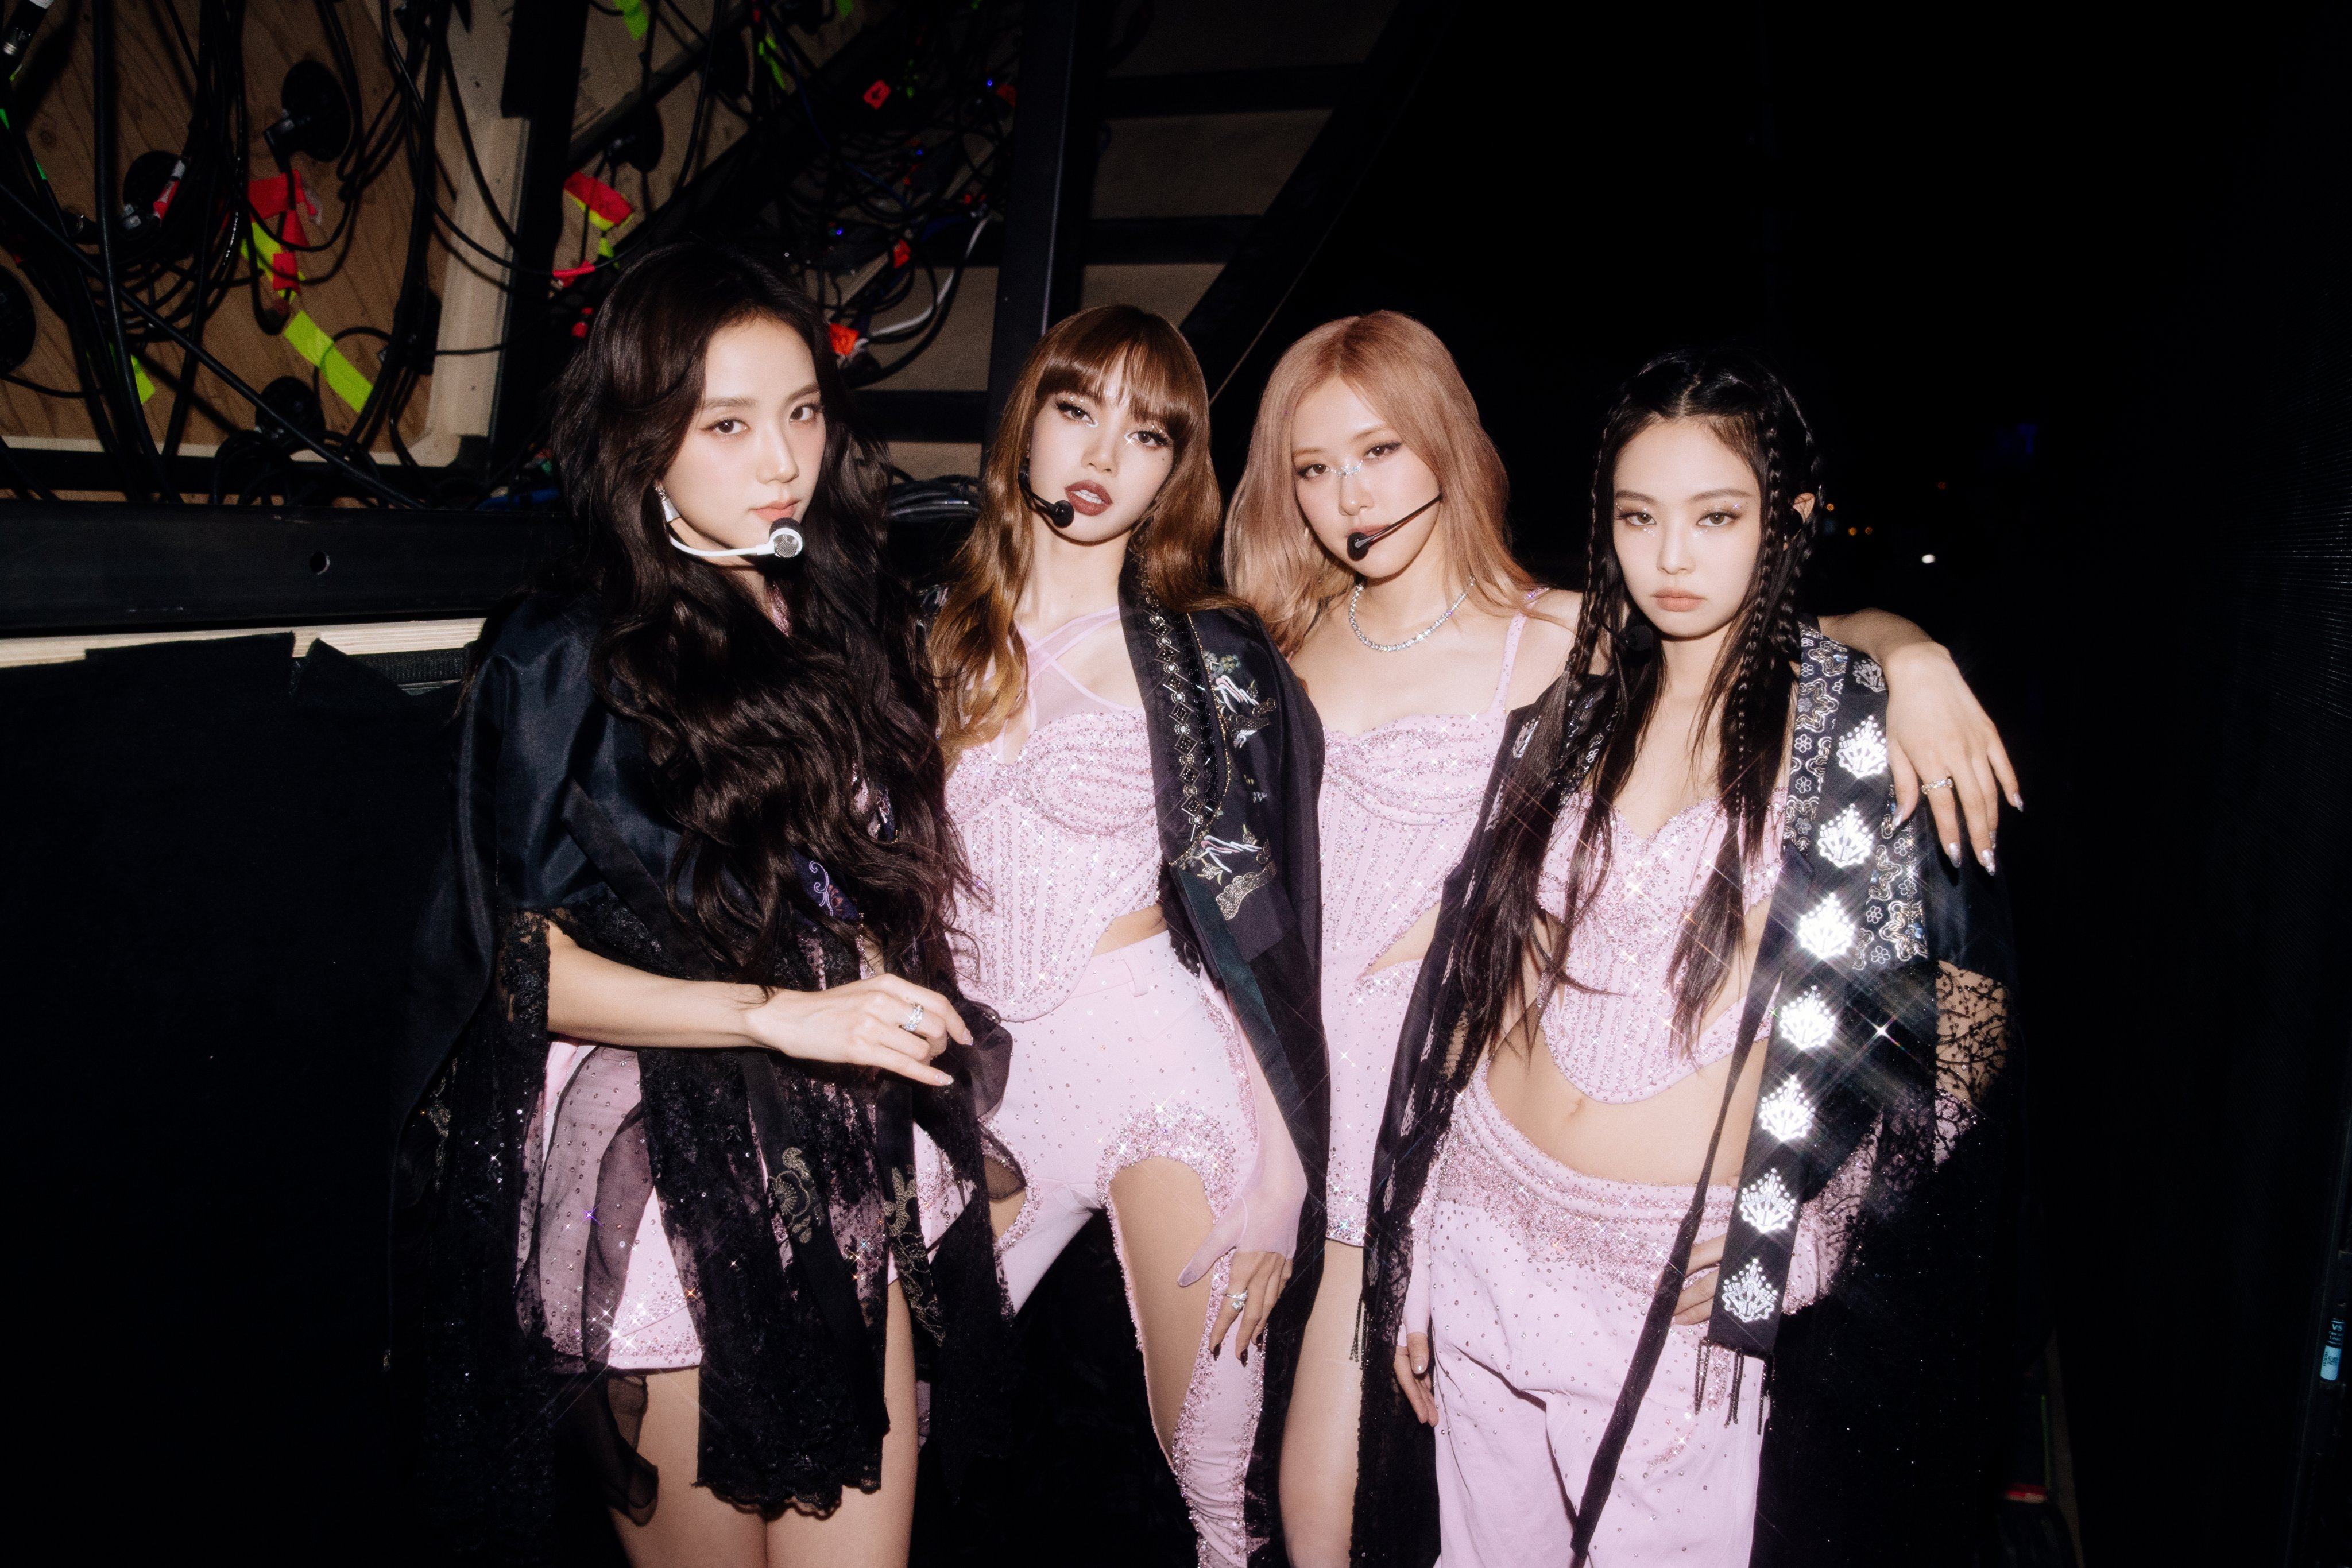 Blackpink decked out in pink at Coachella. Photo: @BlackpinkOfficial/Twitter